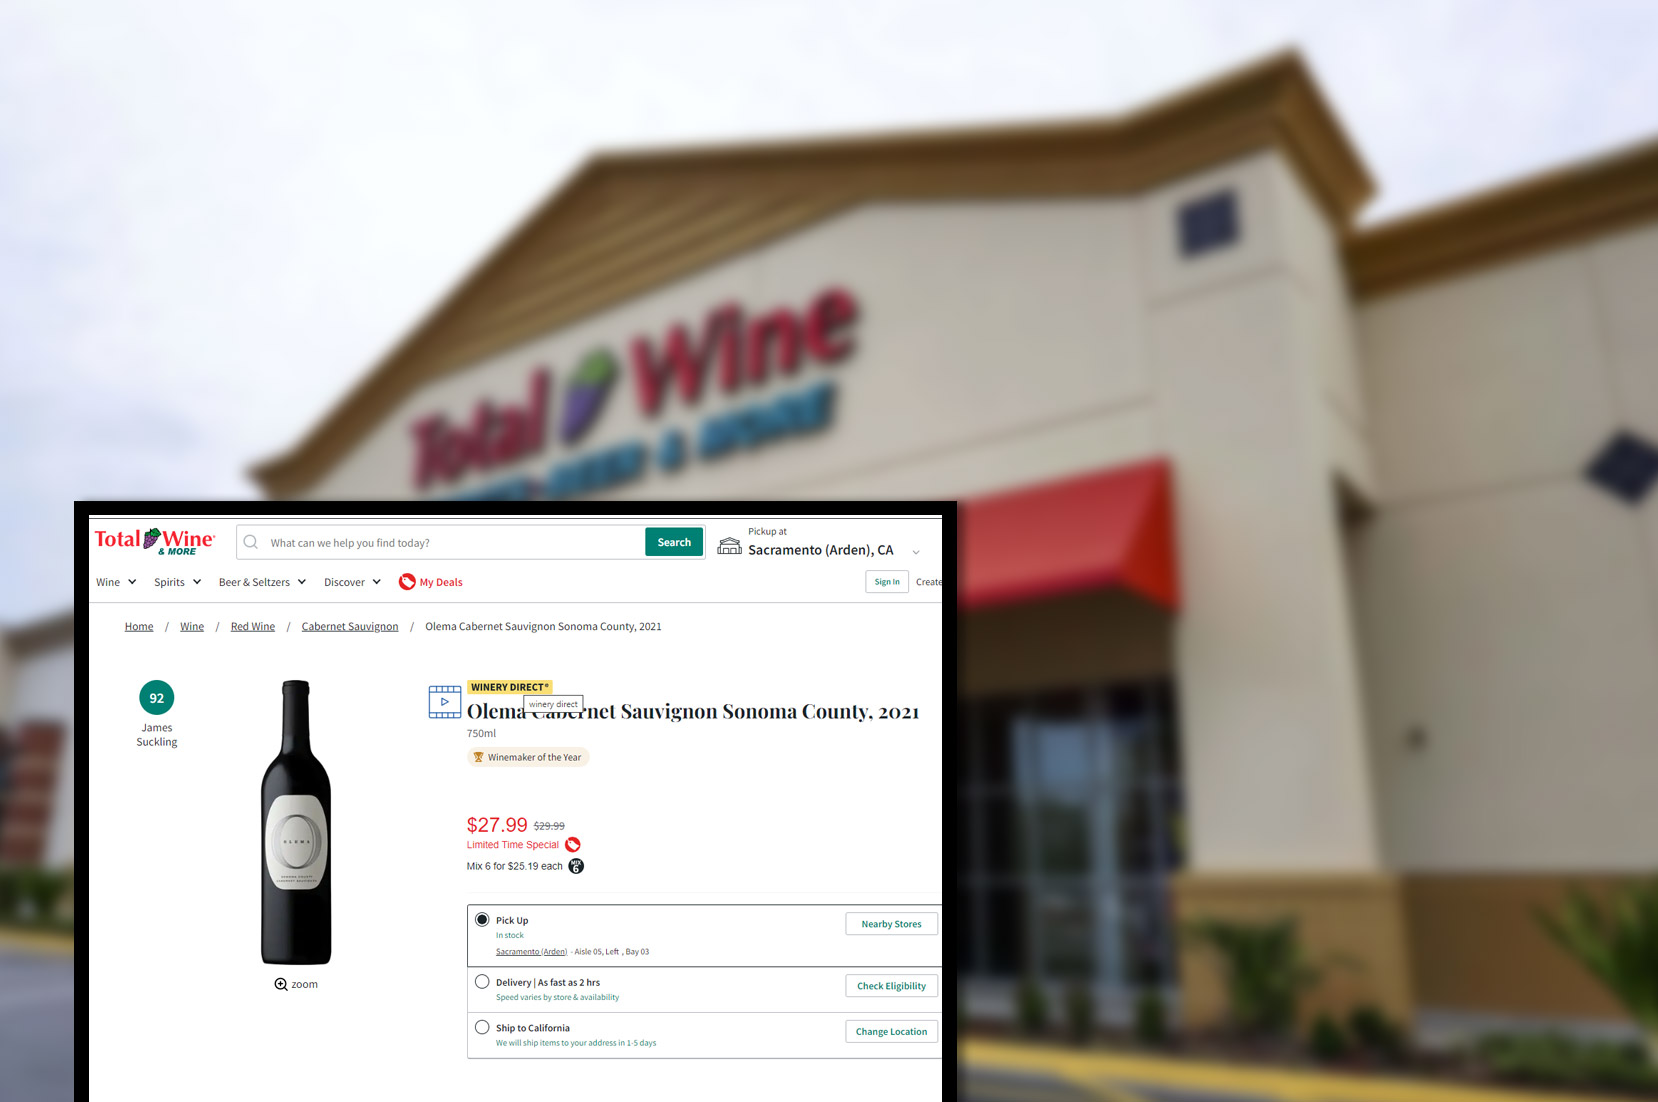 totalwine-comproduct-pricing-information-and-image-scraping-services